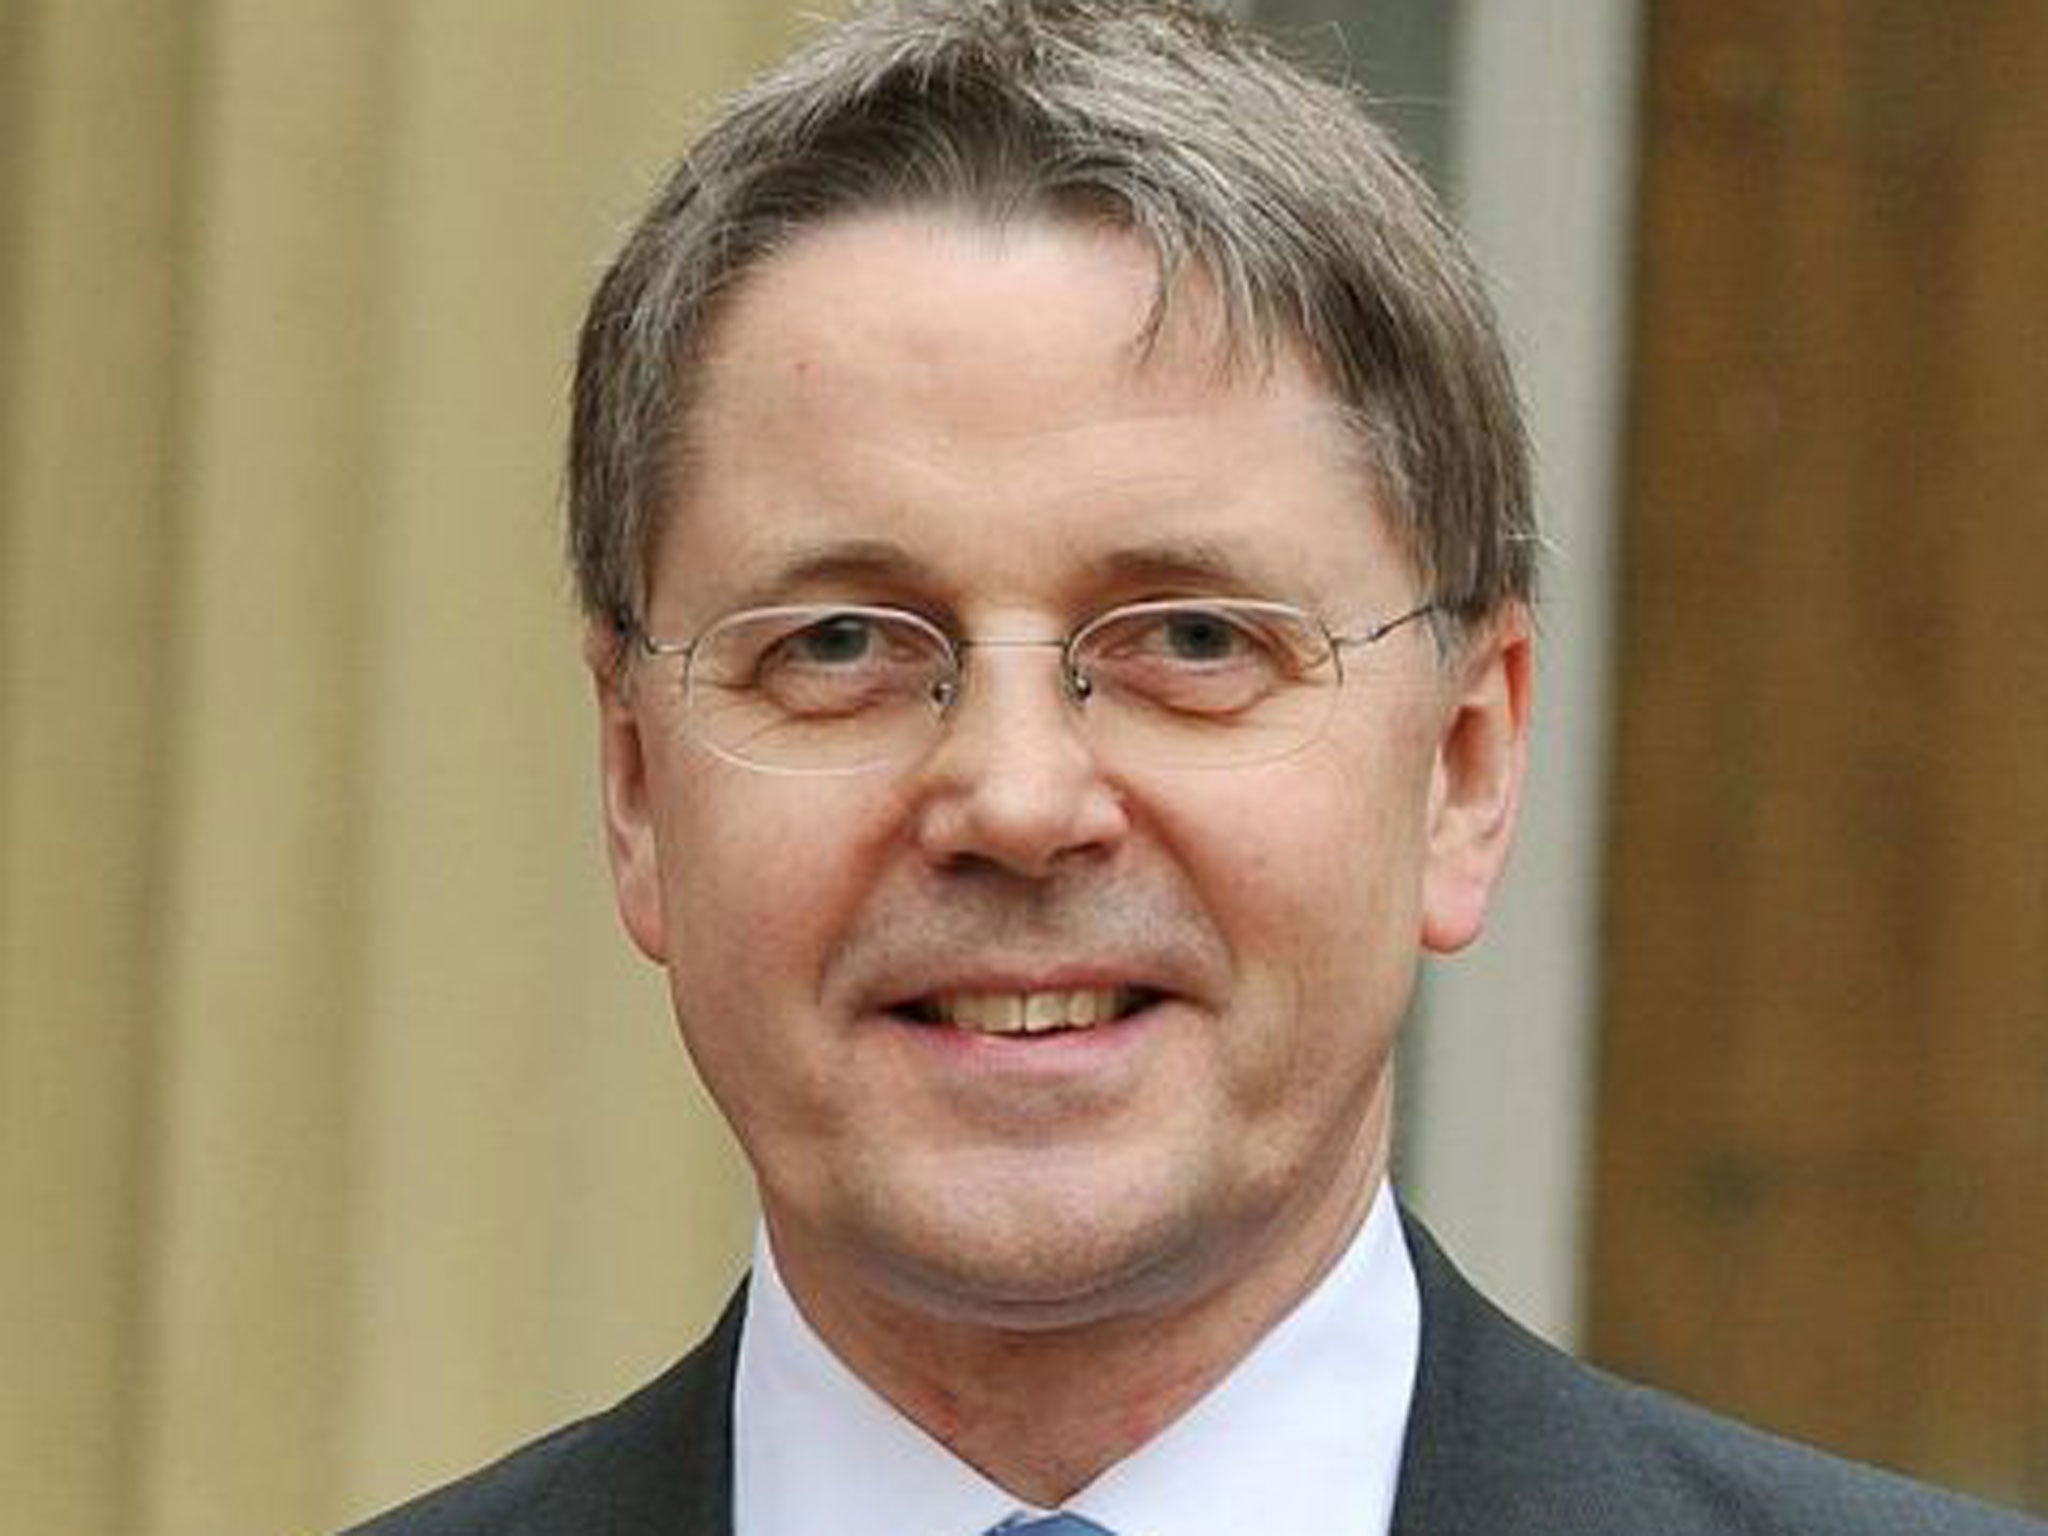 Cabinet Secretary Sir Jeremy Heywood said he told Mr Cameron that CCTV footage showed "inaccuracies and inconsistencies"